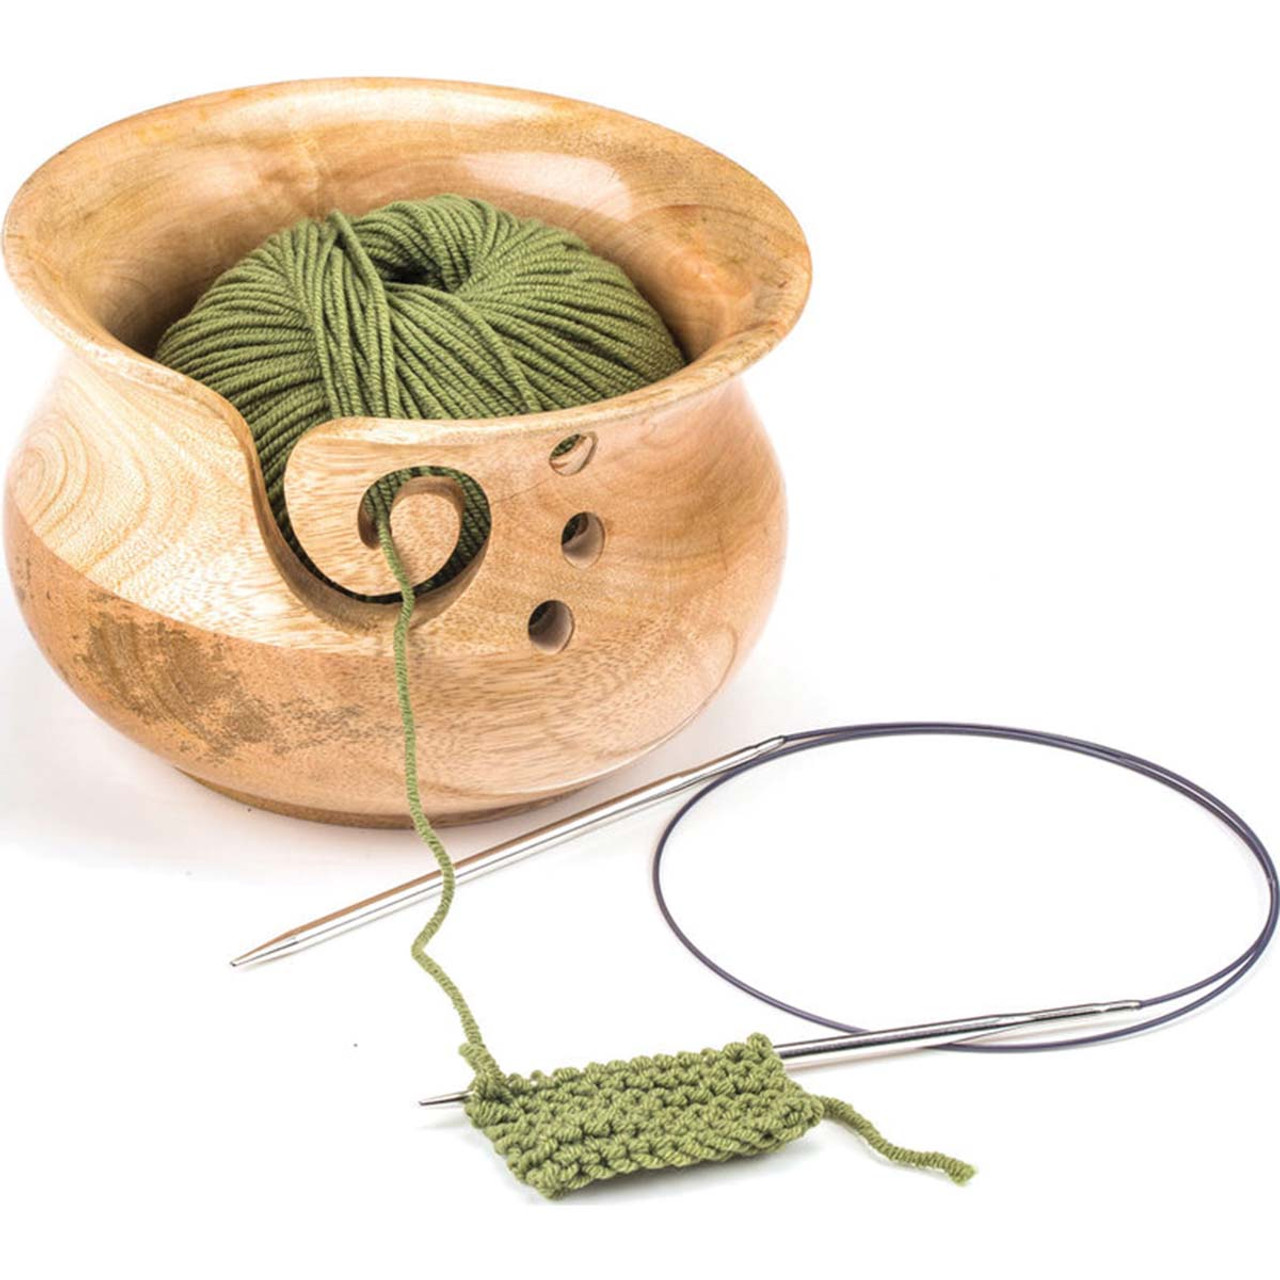 Wooden Yarn Bowls Retail Stores